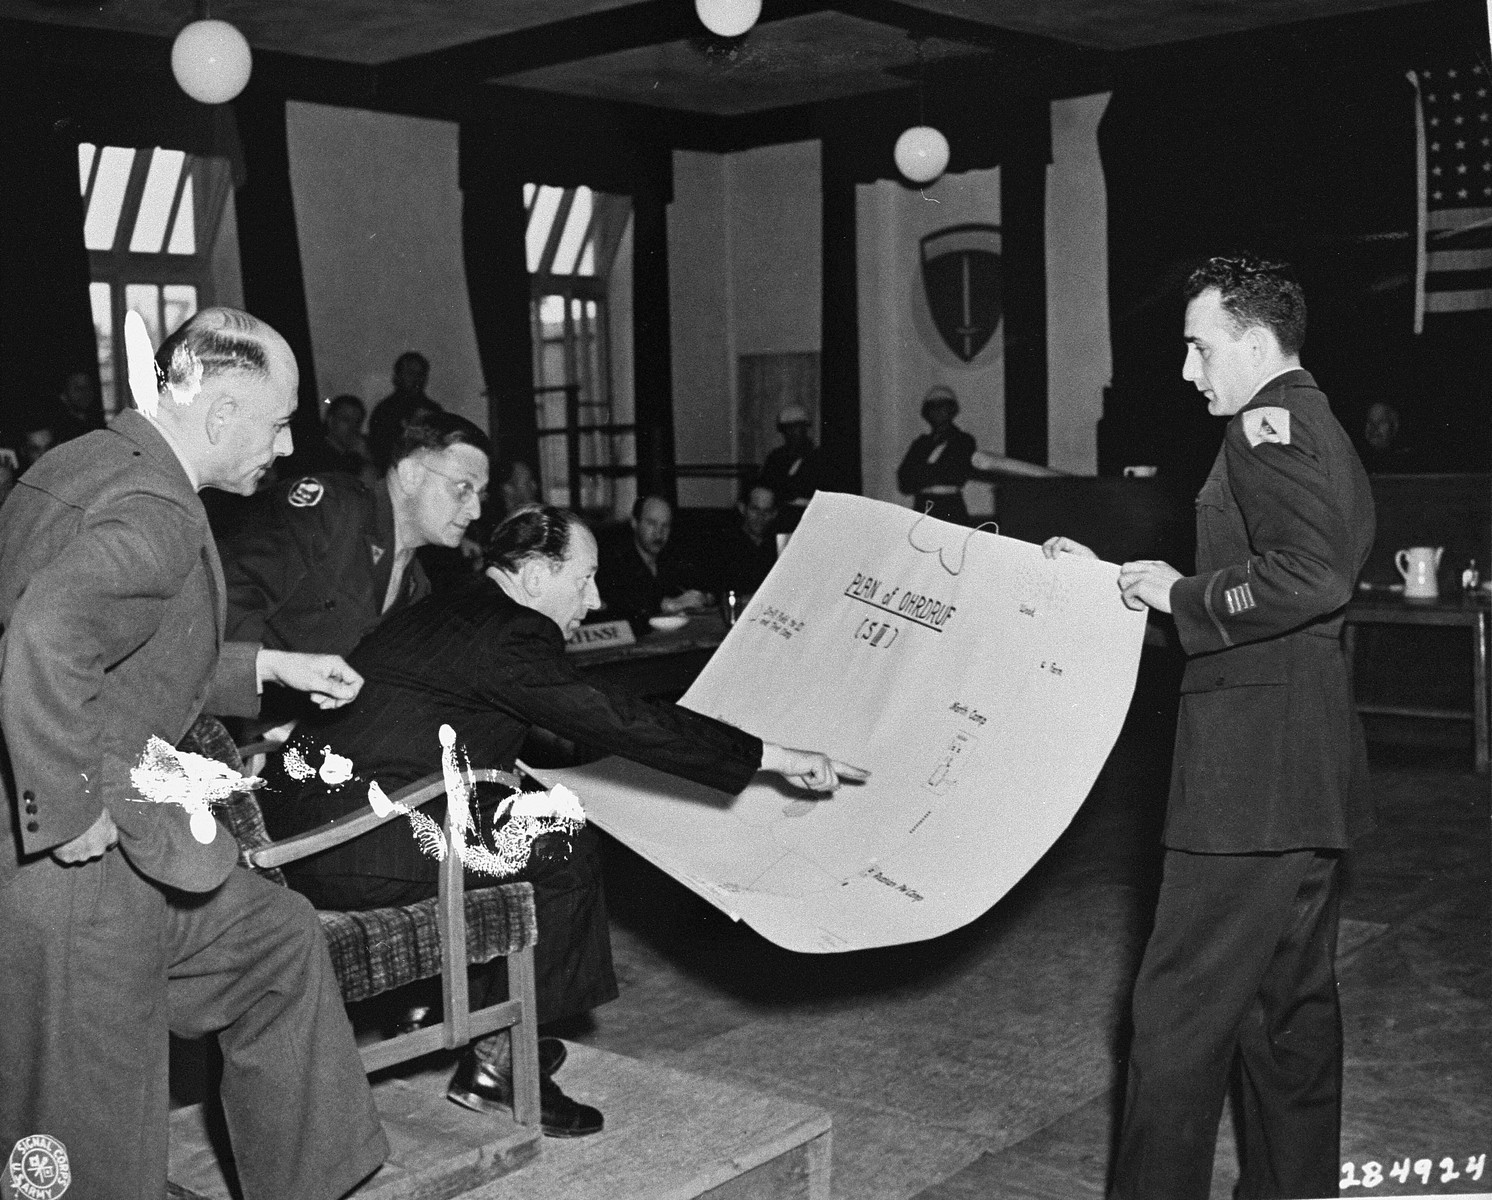 Dr. Viktor Abend, a Polish civilian witness for the prosecution at the trial of former camp personnel and prisoners from Buchenwald, points to a diagram of Ohrdruf, a sub-camp of Buchenwald.  

Court personnel pictured from left to right are Dr. Aheimer, a defense attorney; Rudolph Nathanson, an interpreter; Dr. Abend; and Sol Surowitz, an attorney for the prosecution.